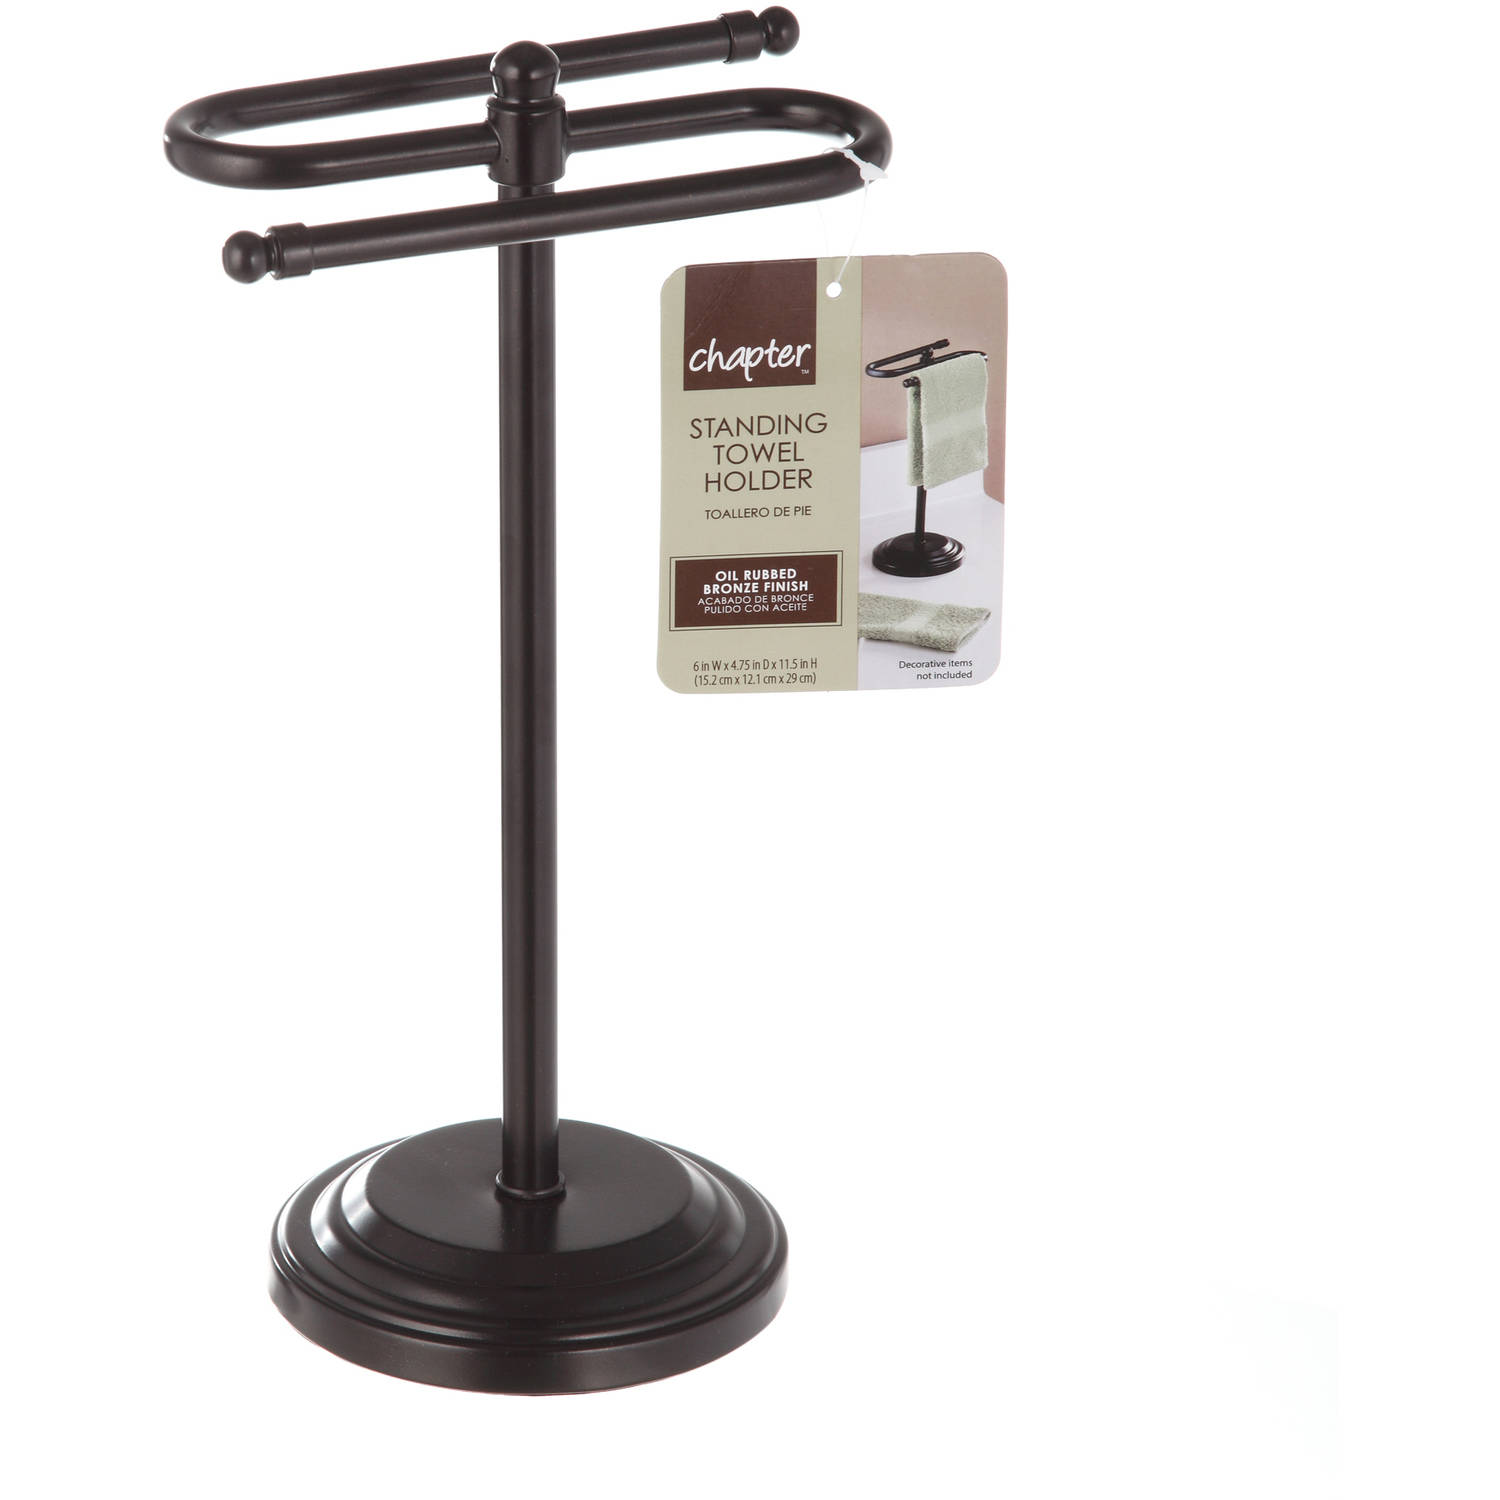 Chapter Steel Free-Standing Towel Holder - Oil Rubbed Bronze - image 1 of 4